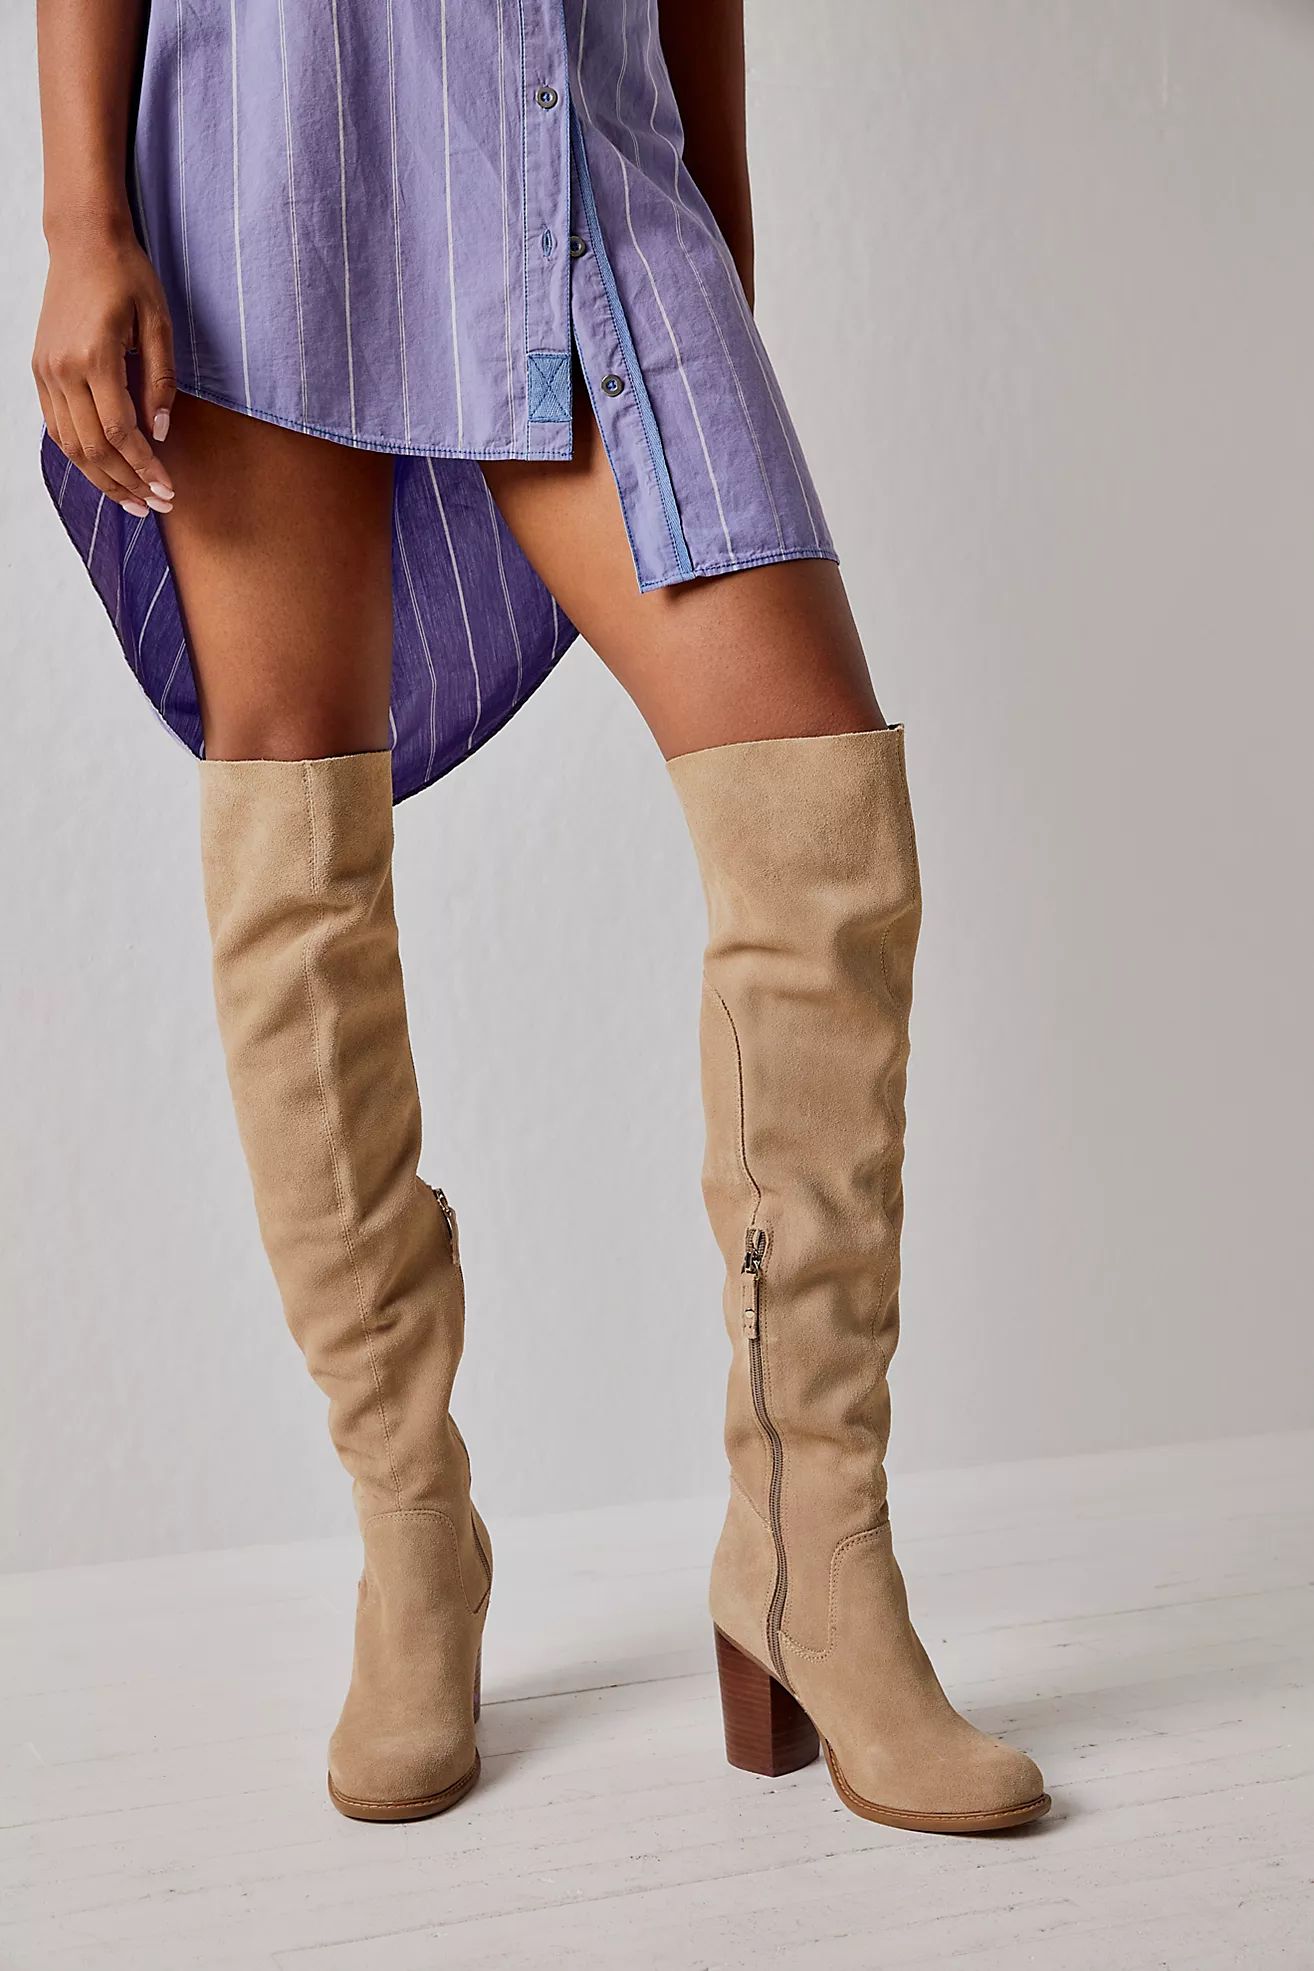 Logan Over-The-Knee Boots | Free People (Global - UK&FR Excluded)